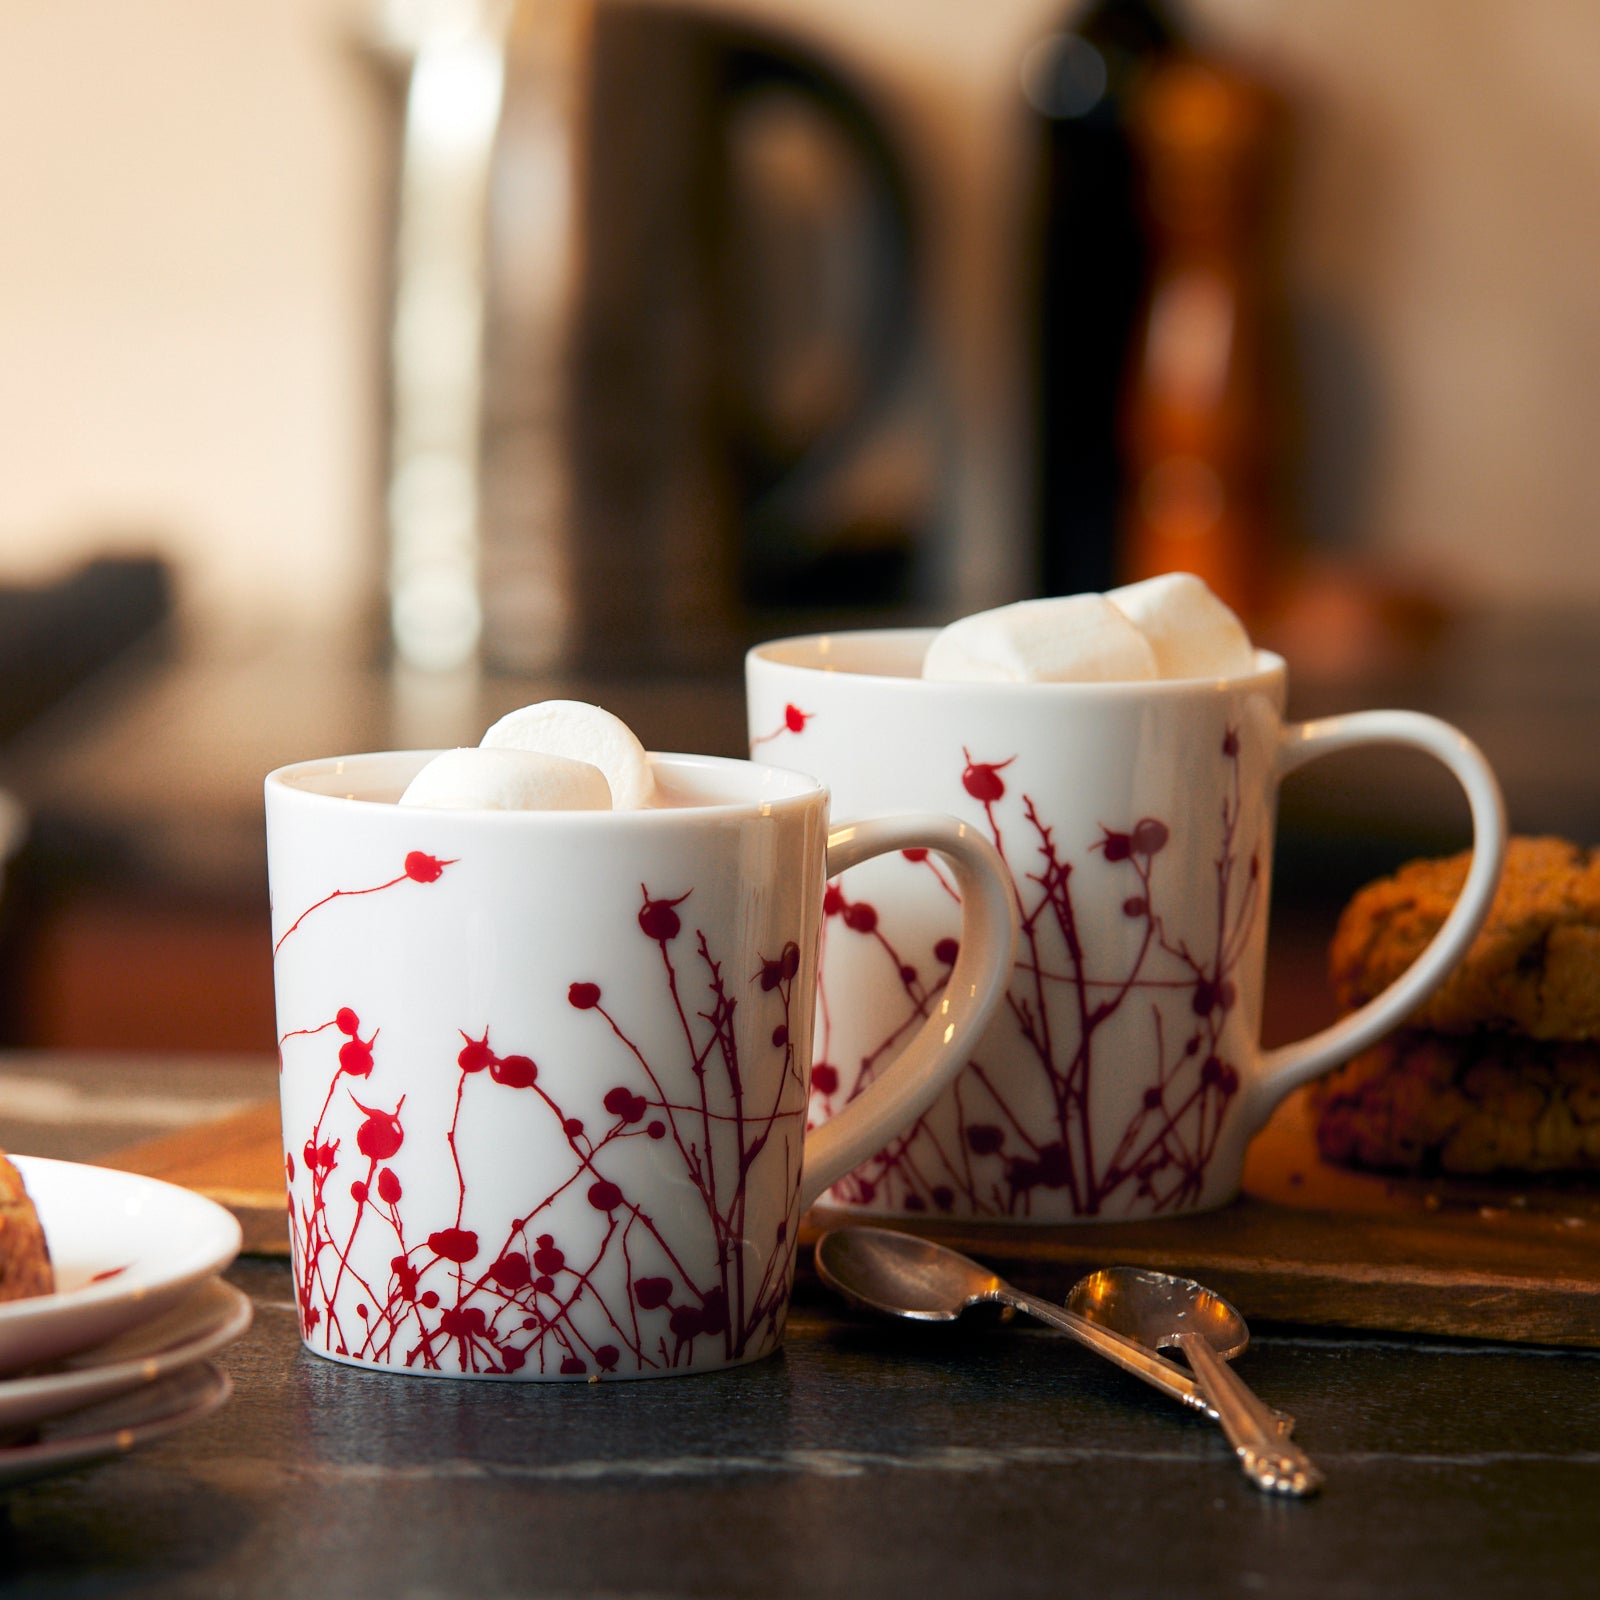 Pair of Winterberries Oversized 14 oz Porcelain Mugs in Crimson Red and White from Caskata Shown on a Counter with Hot Chocolate